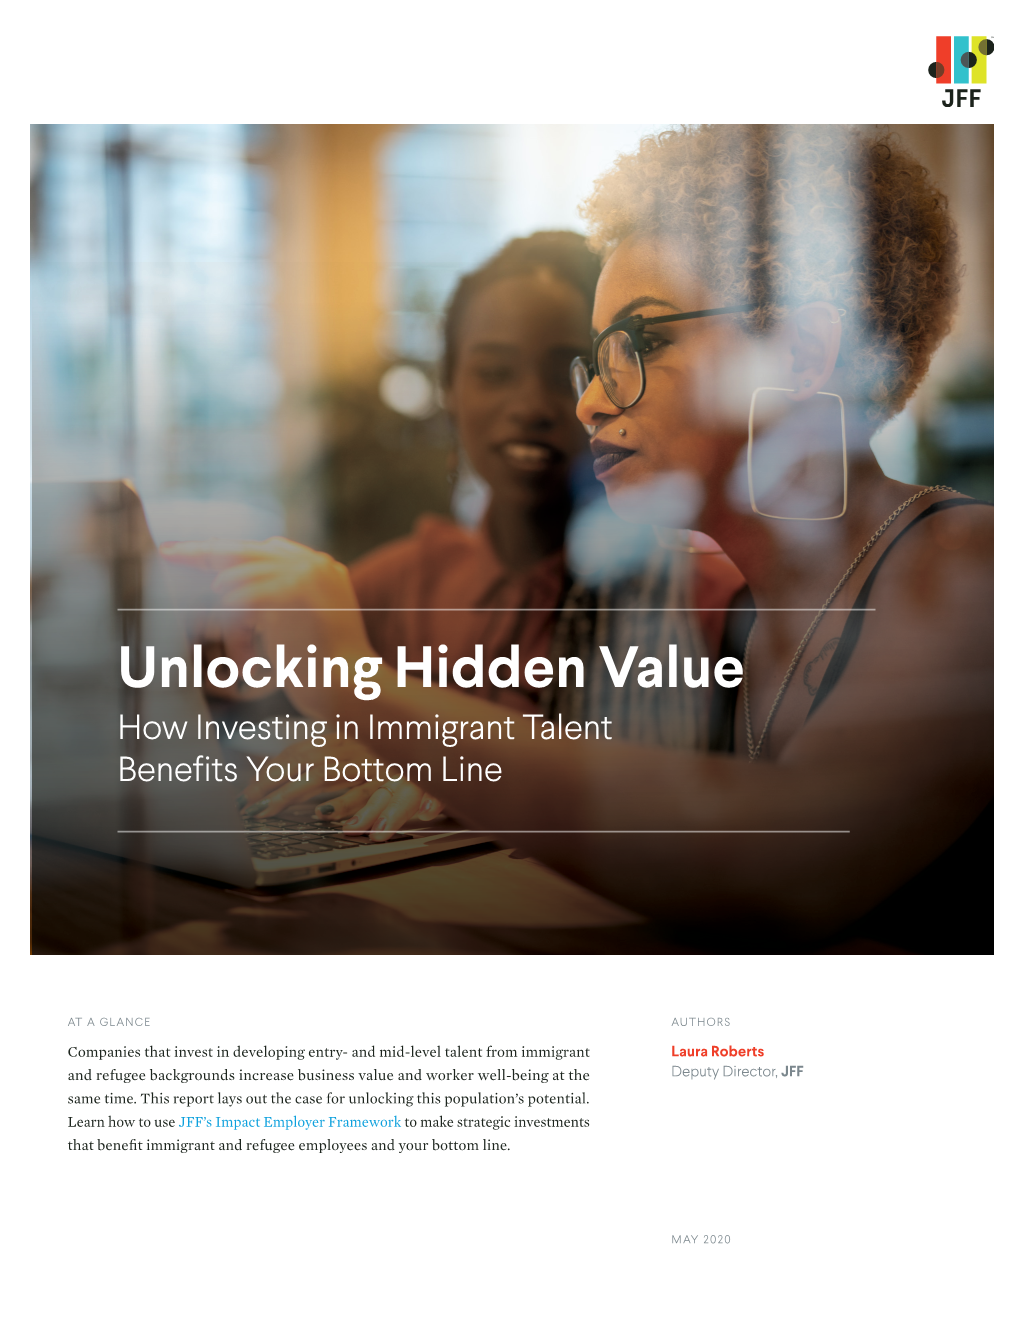 Unlocking Hidden Value How Investing in Immigrant Talent Benefits Your Bottom Line